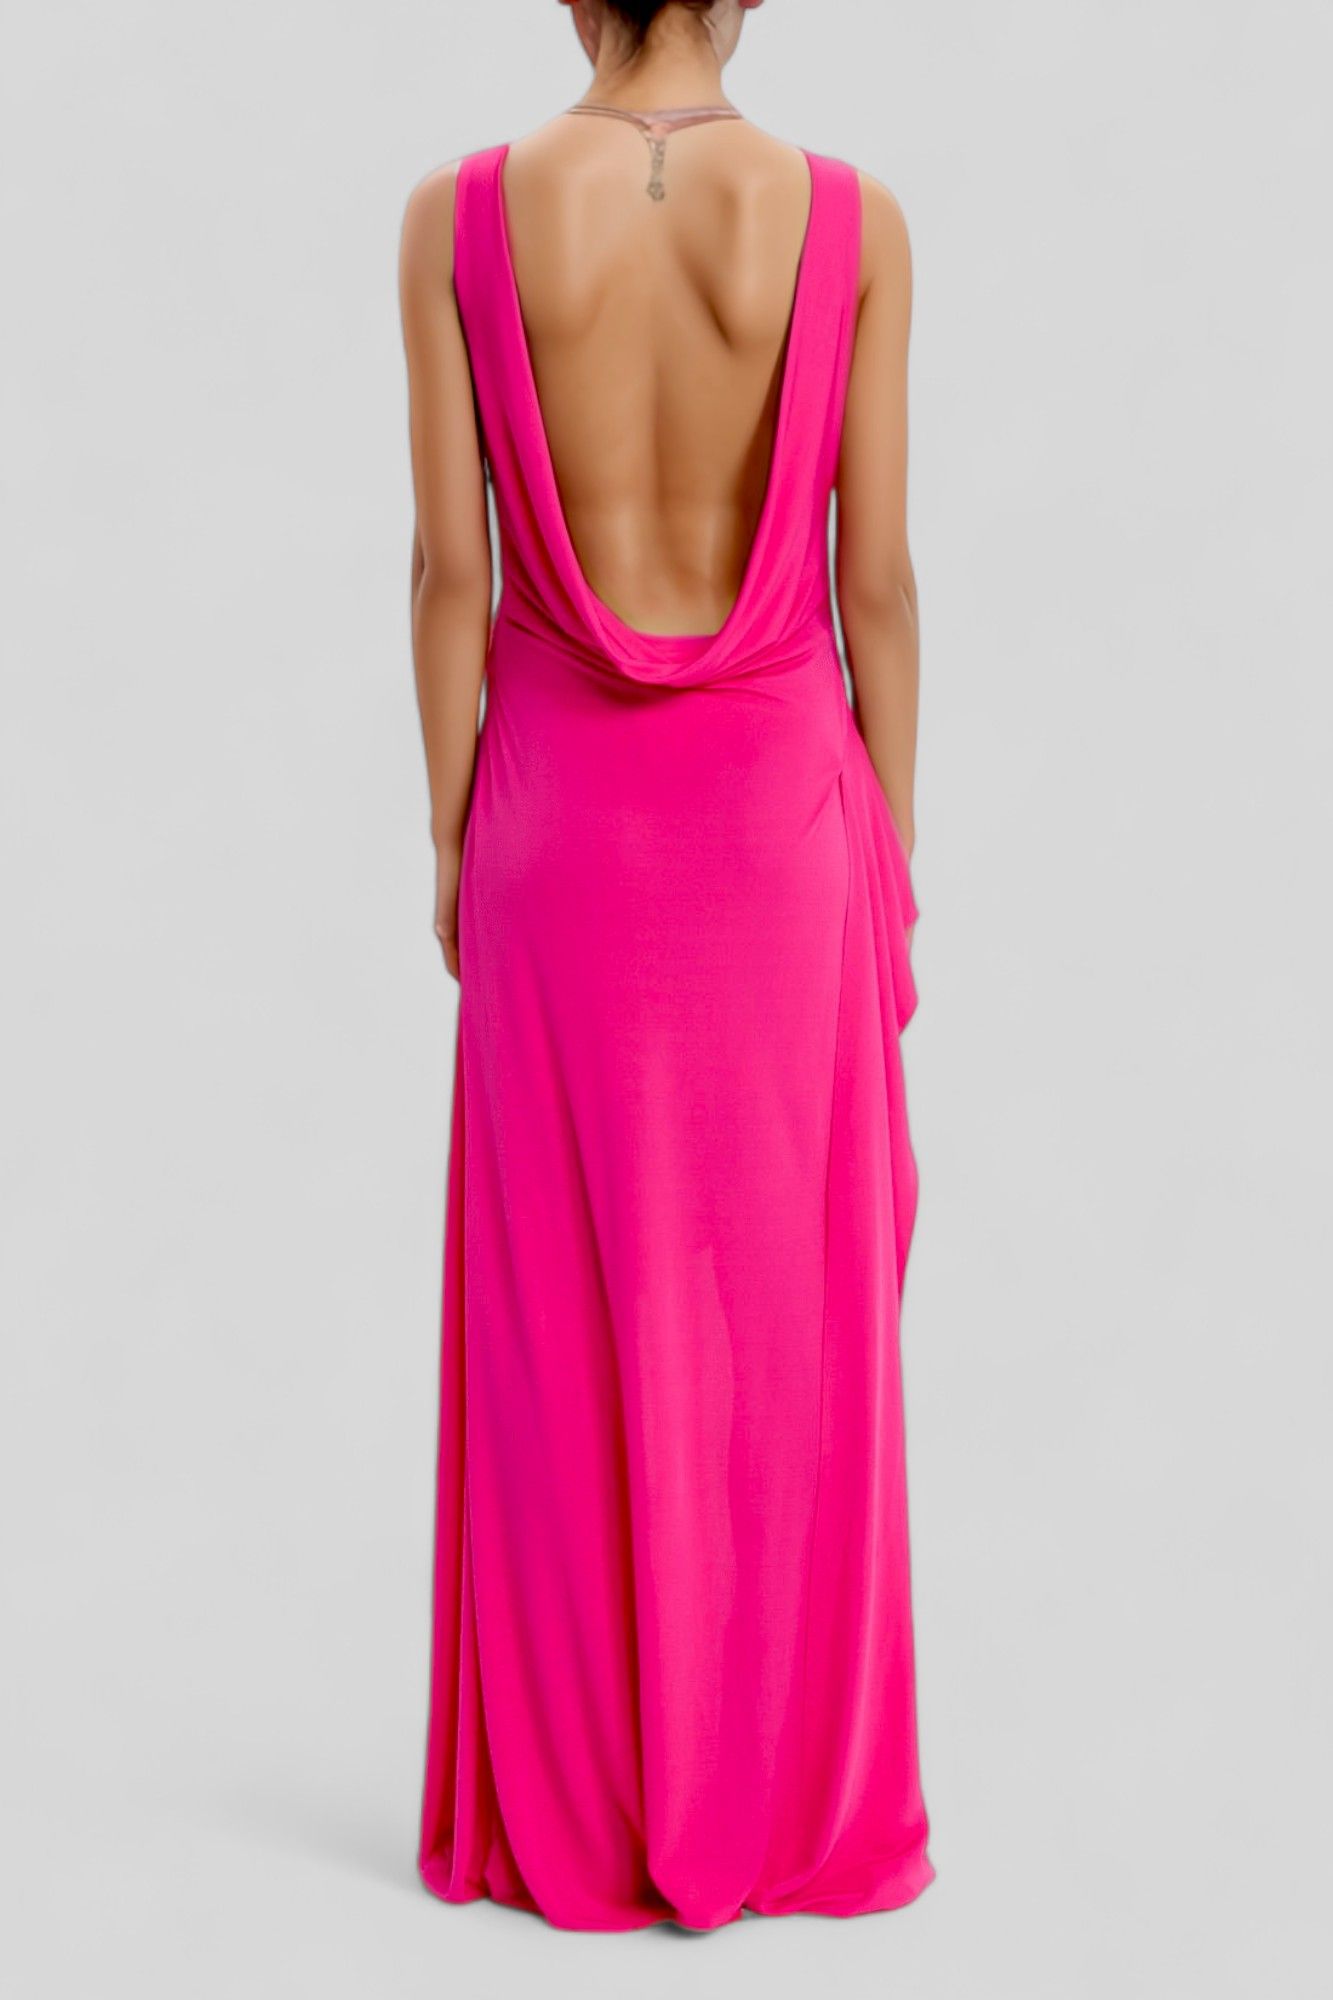 CUE - Fuschia Floor Length Cowl Back Gown Backless